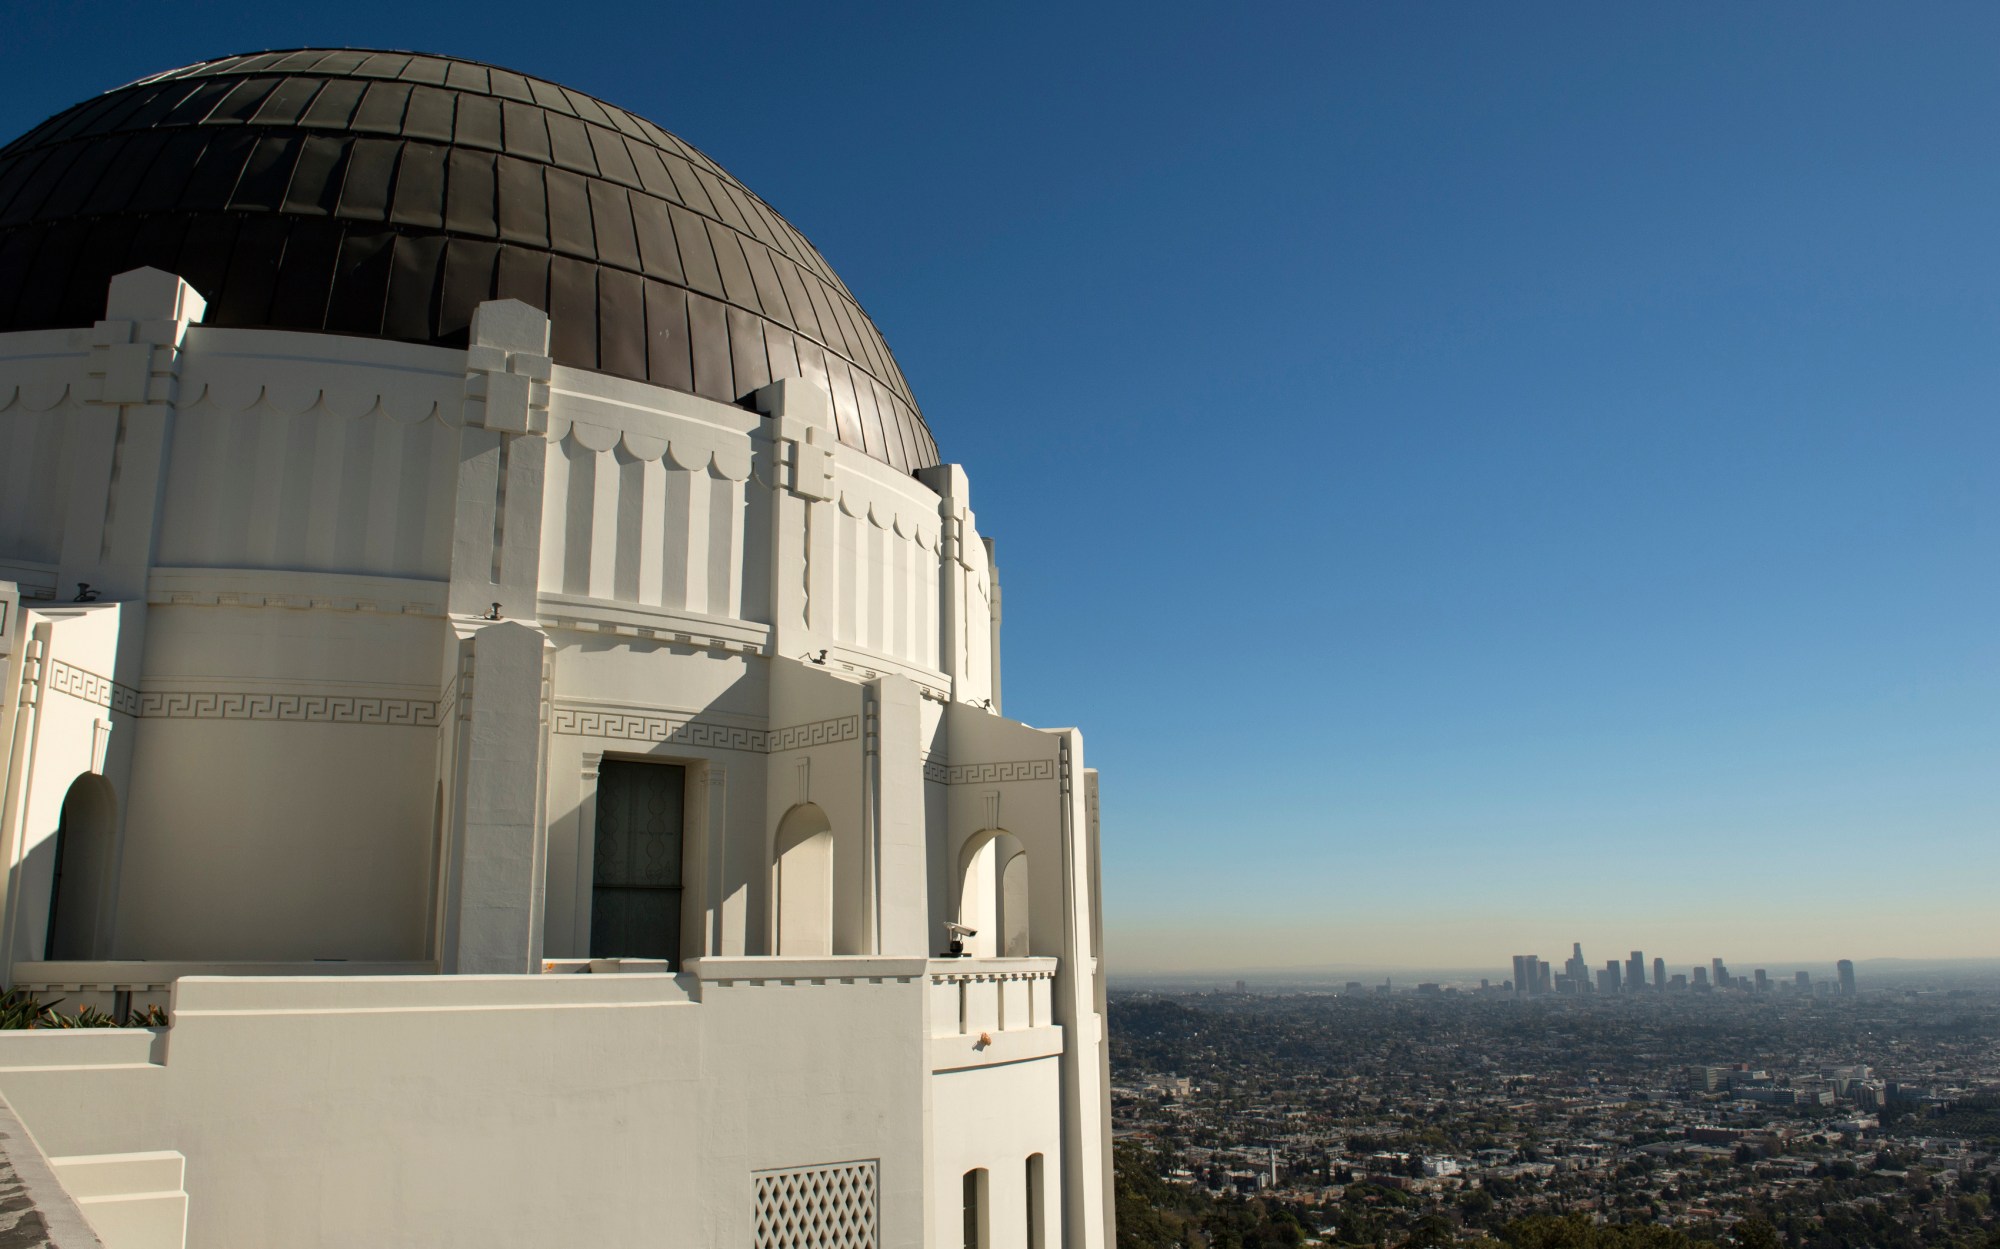 Griffith Observatory sits on the south-facing slope of Mount Hollywood at Griffith Park in Los Angeles. (File Photo)